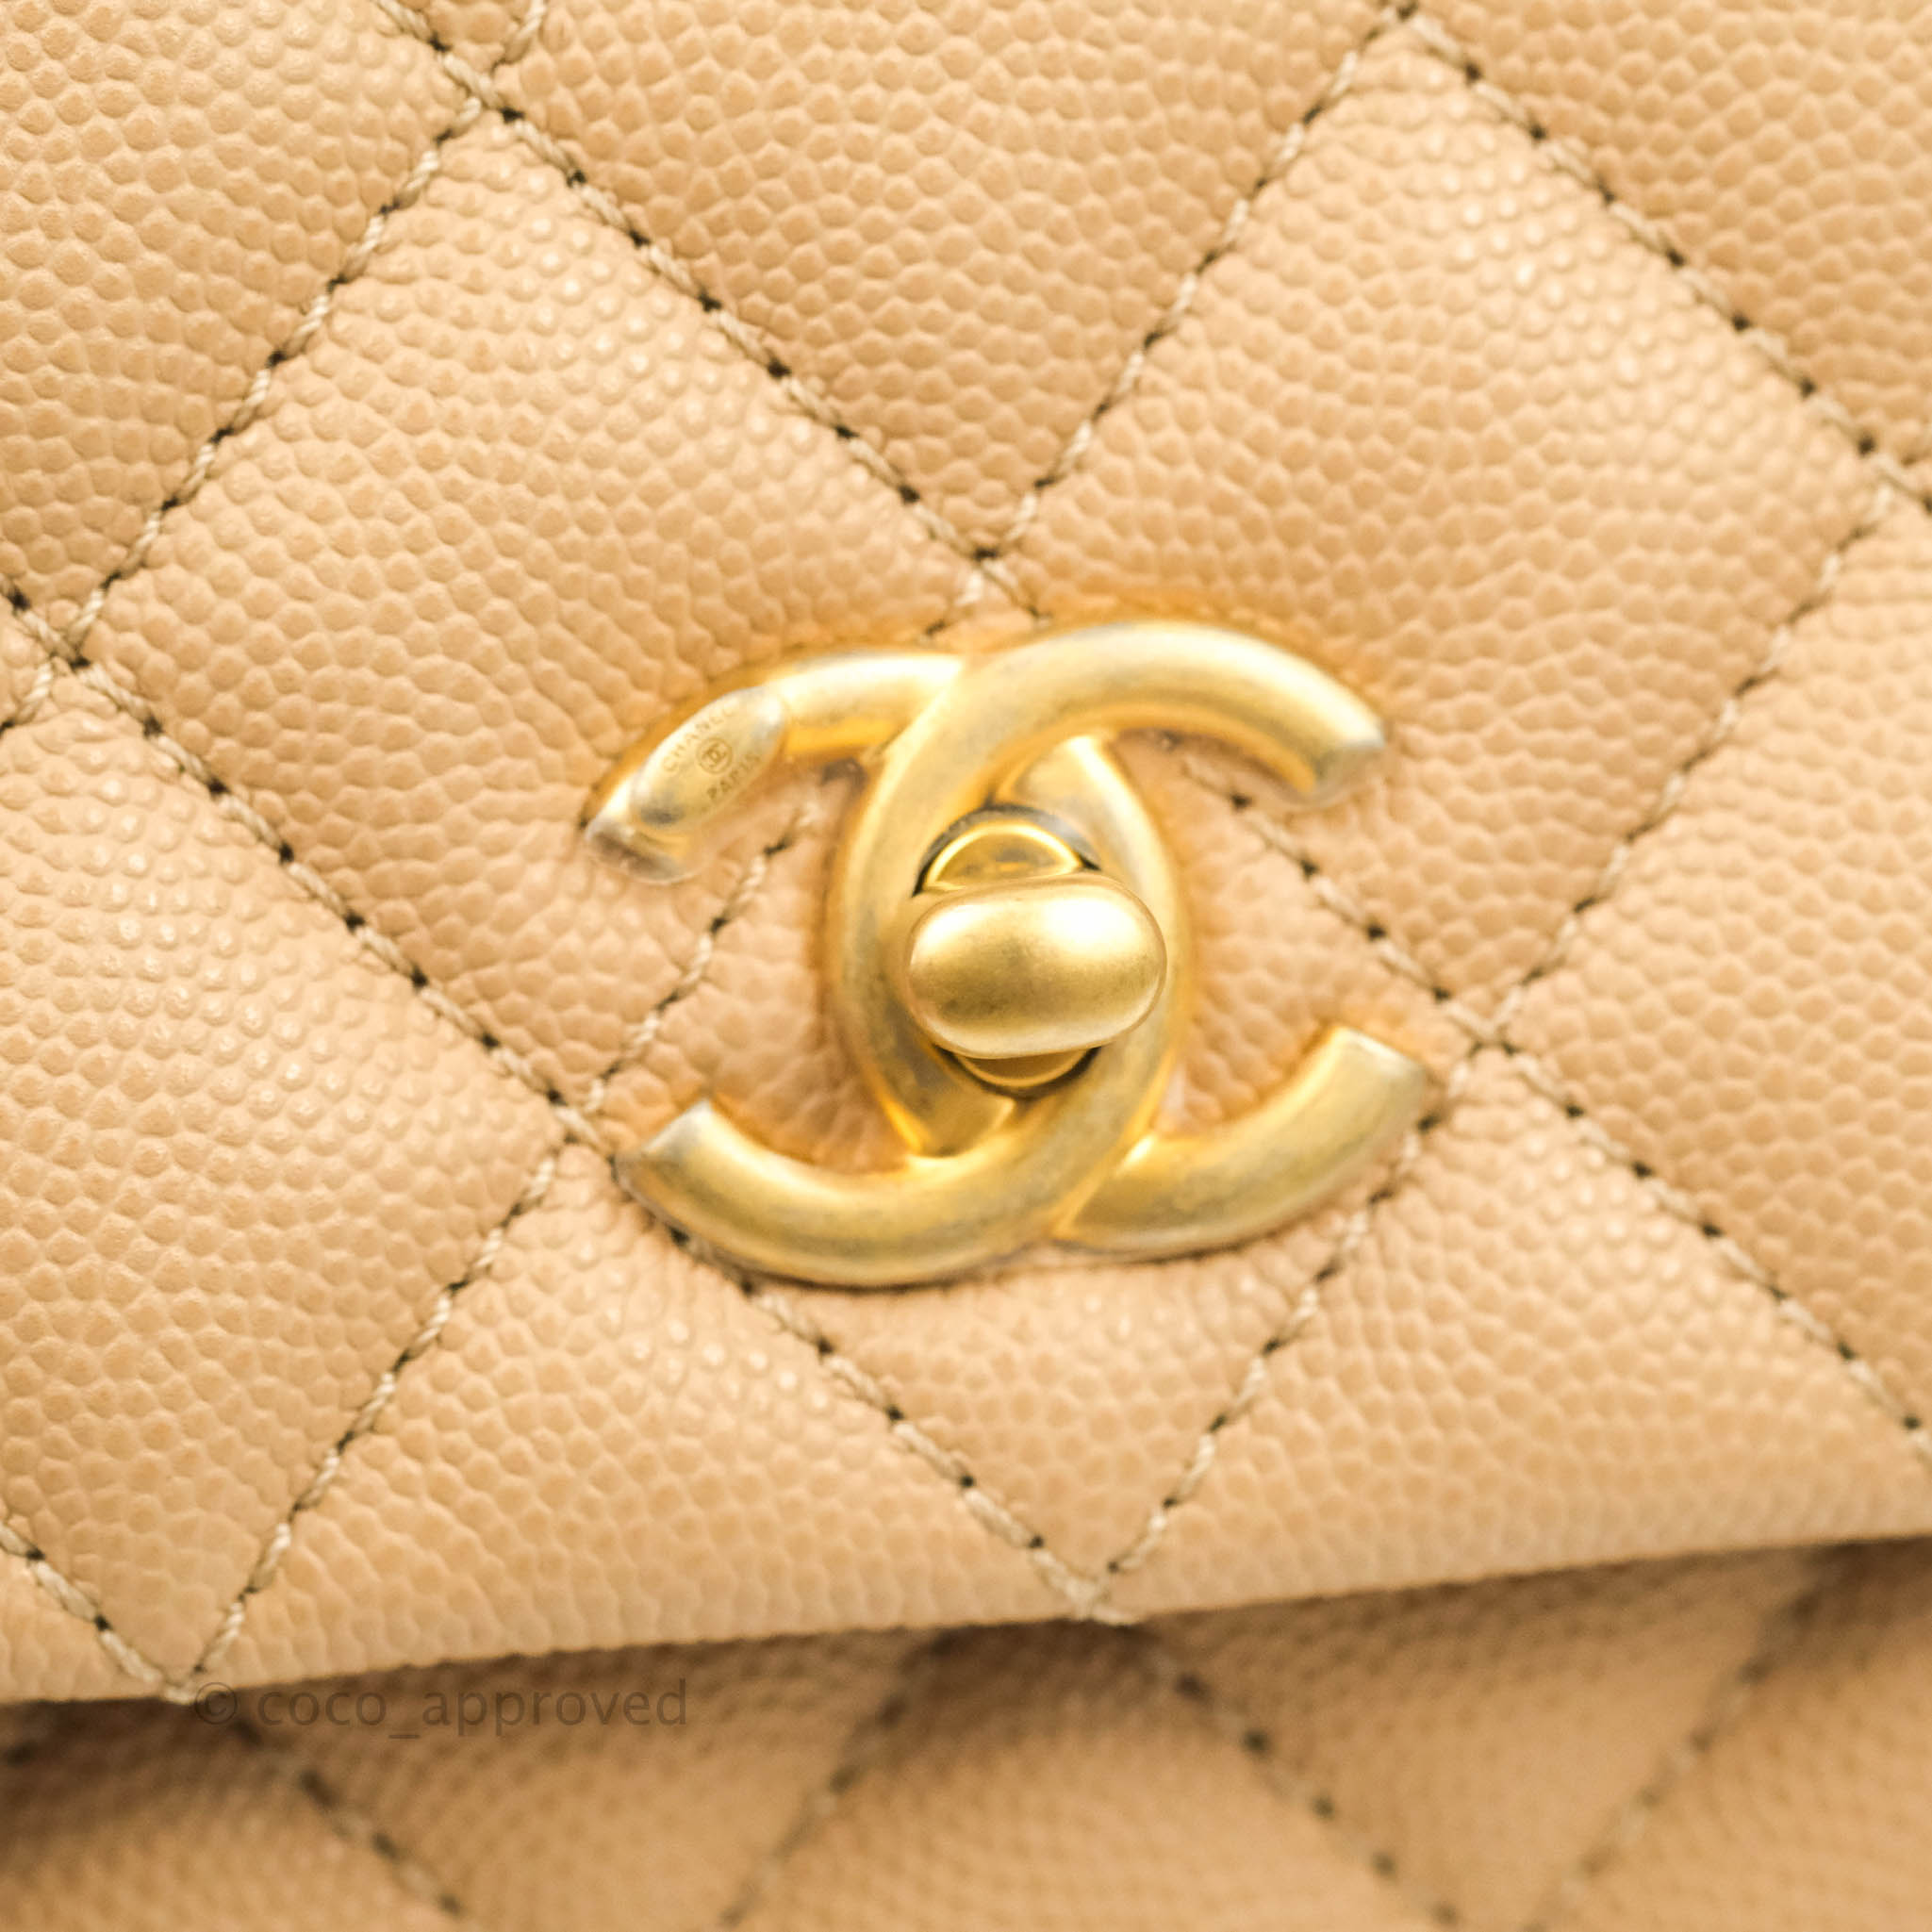 Chanel Vintage White Lizard Small Classic Double Flap Gold